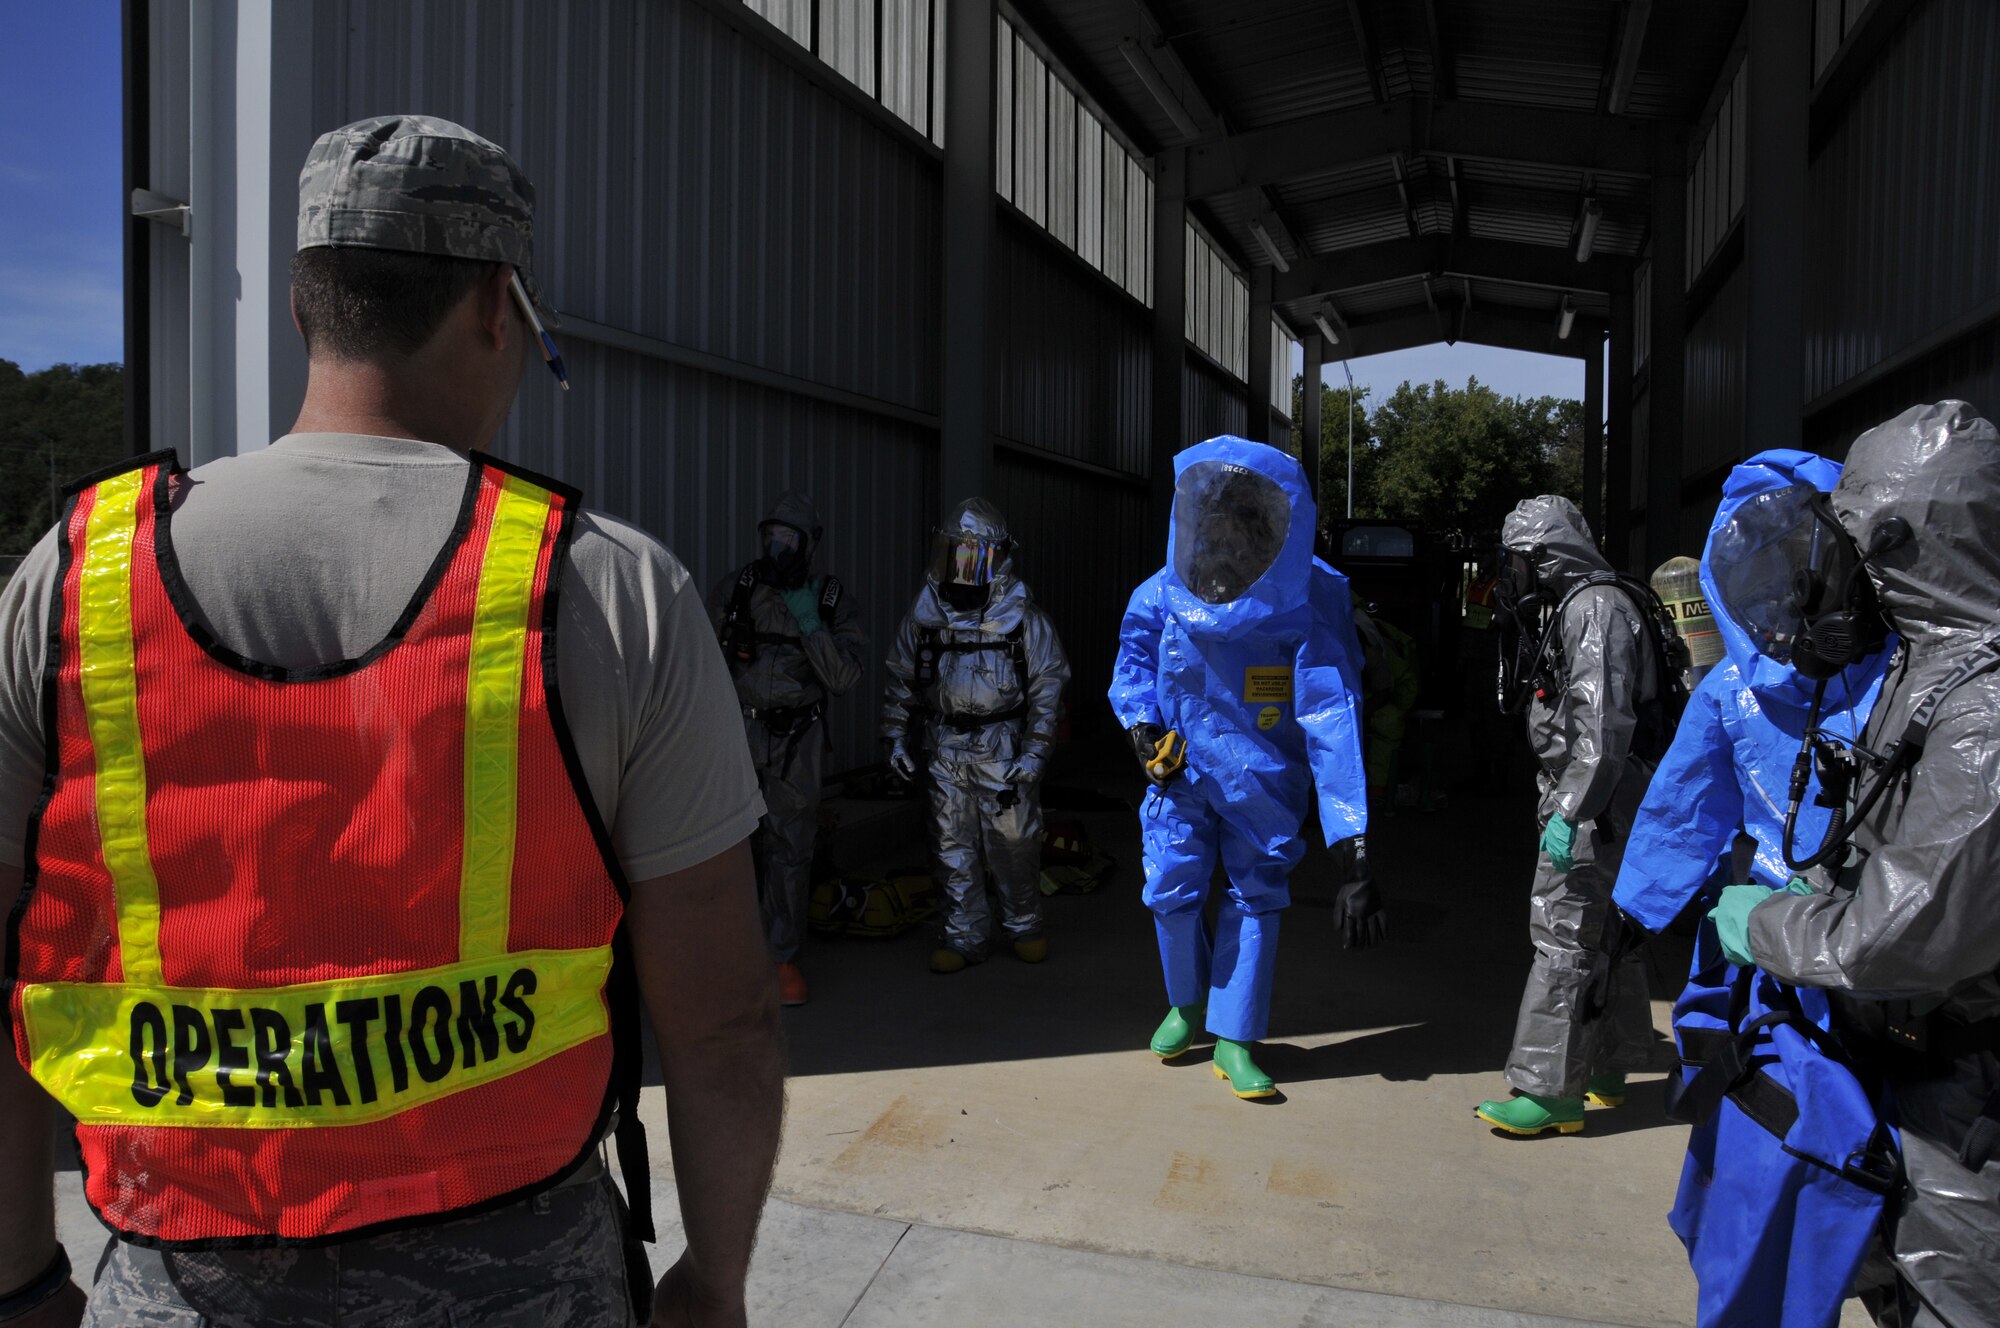 Emergency management specialists with the 188th Civil Engineering Squadron work to identify and clean up hazardous material spills during a training  exercise at Ebbing Air National Guard Base, Fort Smith, Ark., Oct. 4. (U.S. Air National Guard photo by Staff Sgt. John Suleski/released)